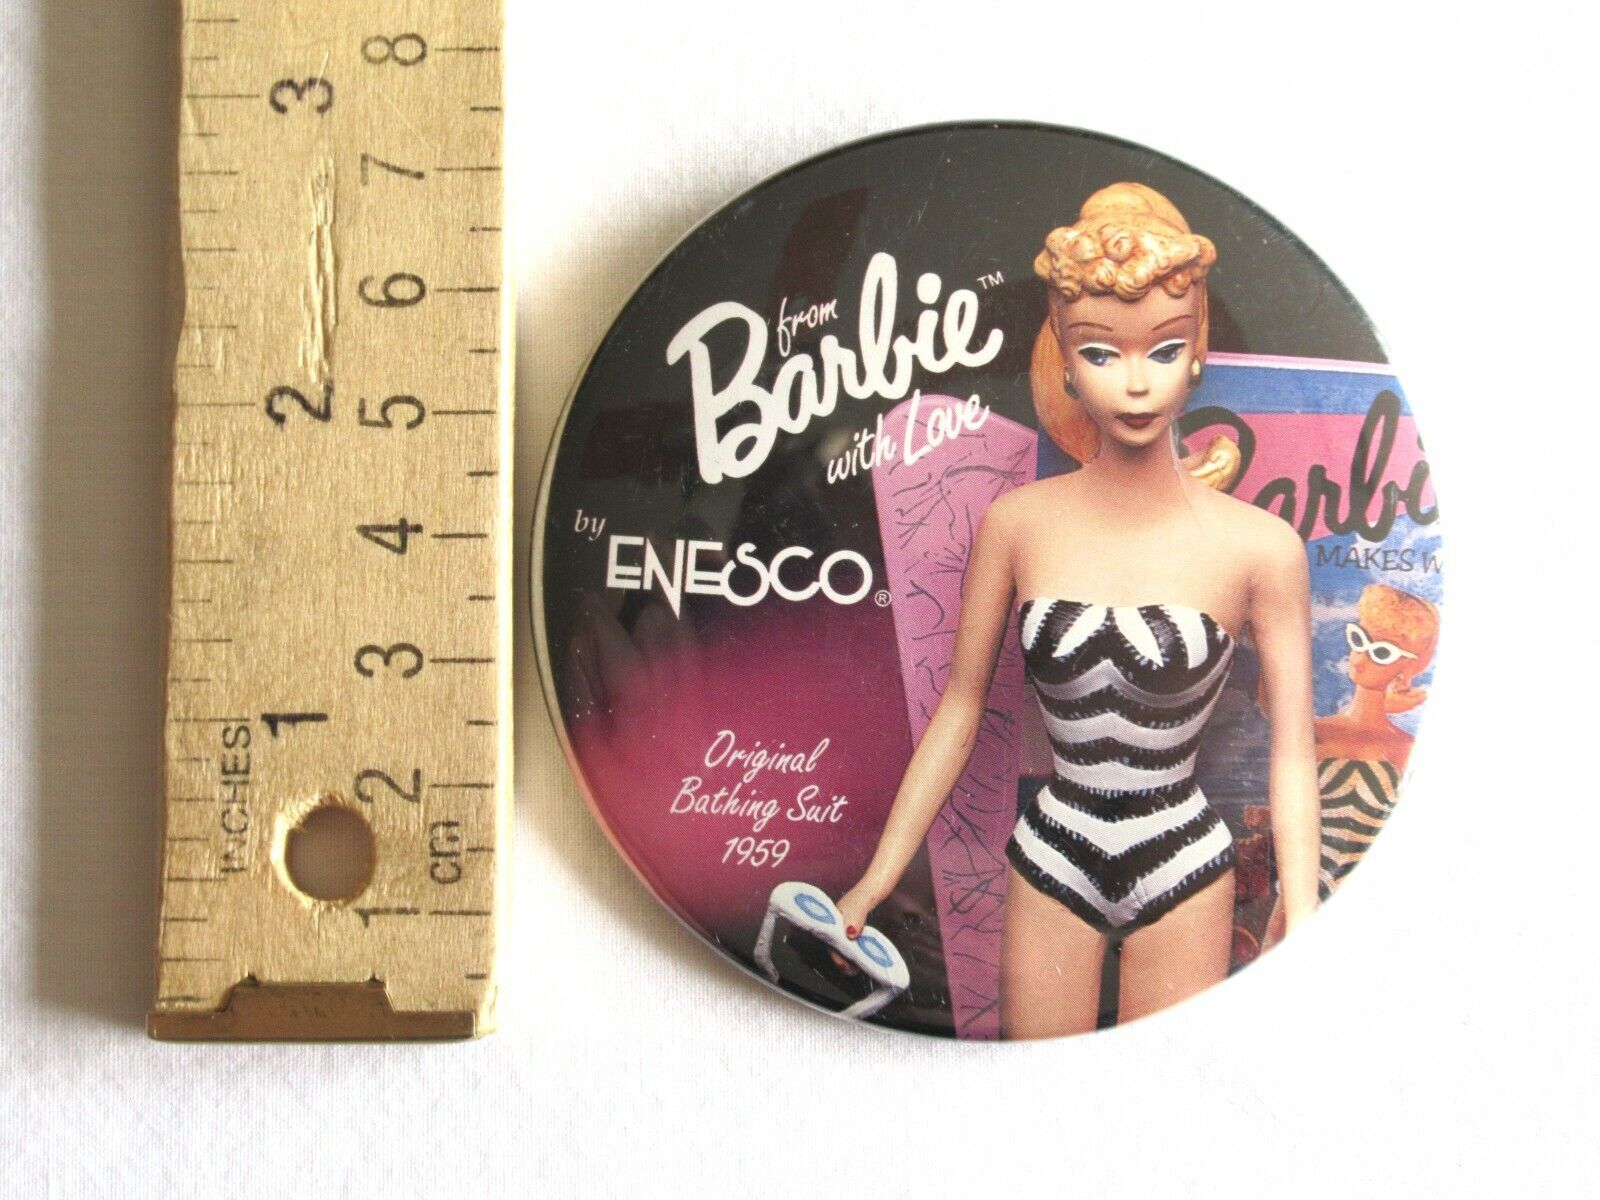 From Barbie With Love Enesco 3'' Button Original Bathing Suit 1995 Doll Pinback - $9.93